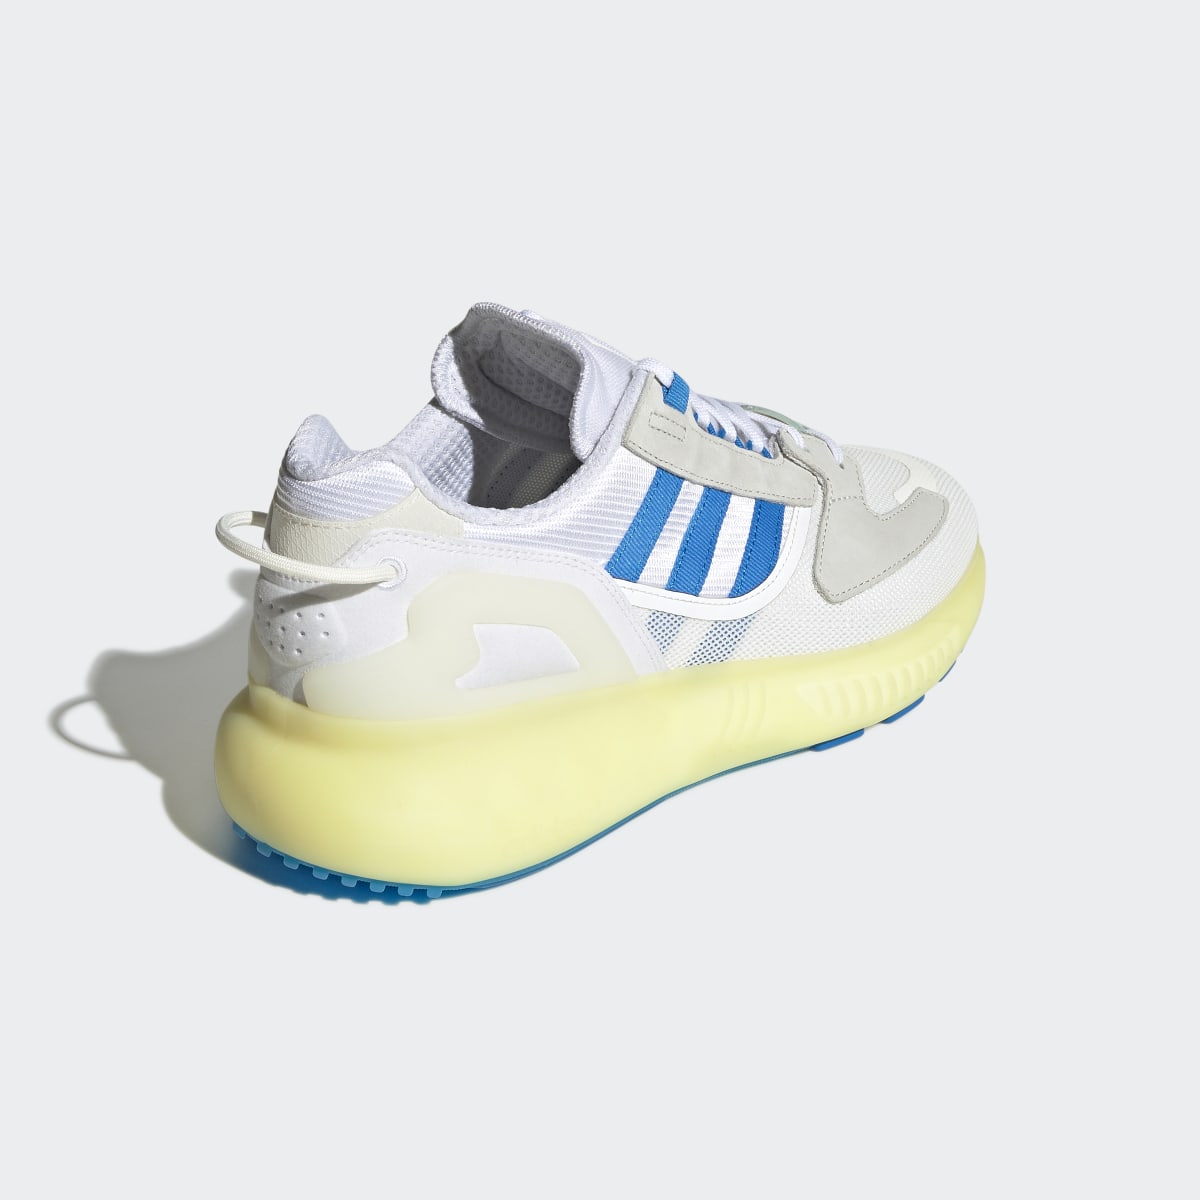 Adidas ZX 5K BOOST Shoes. 6